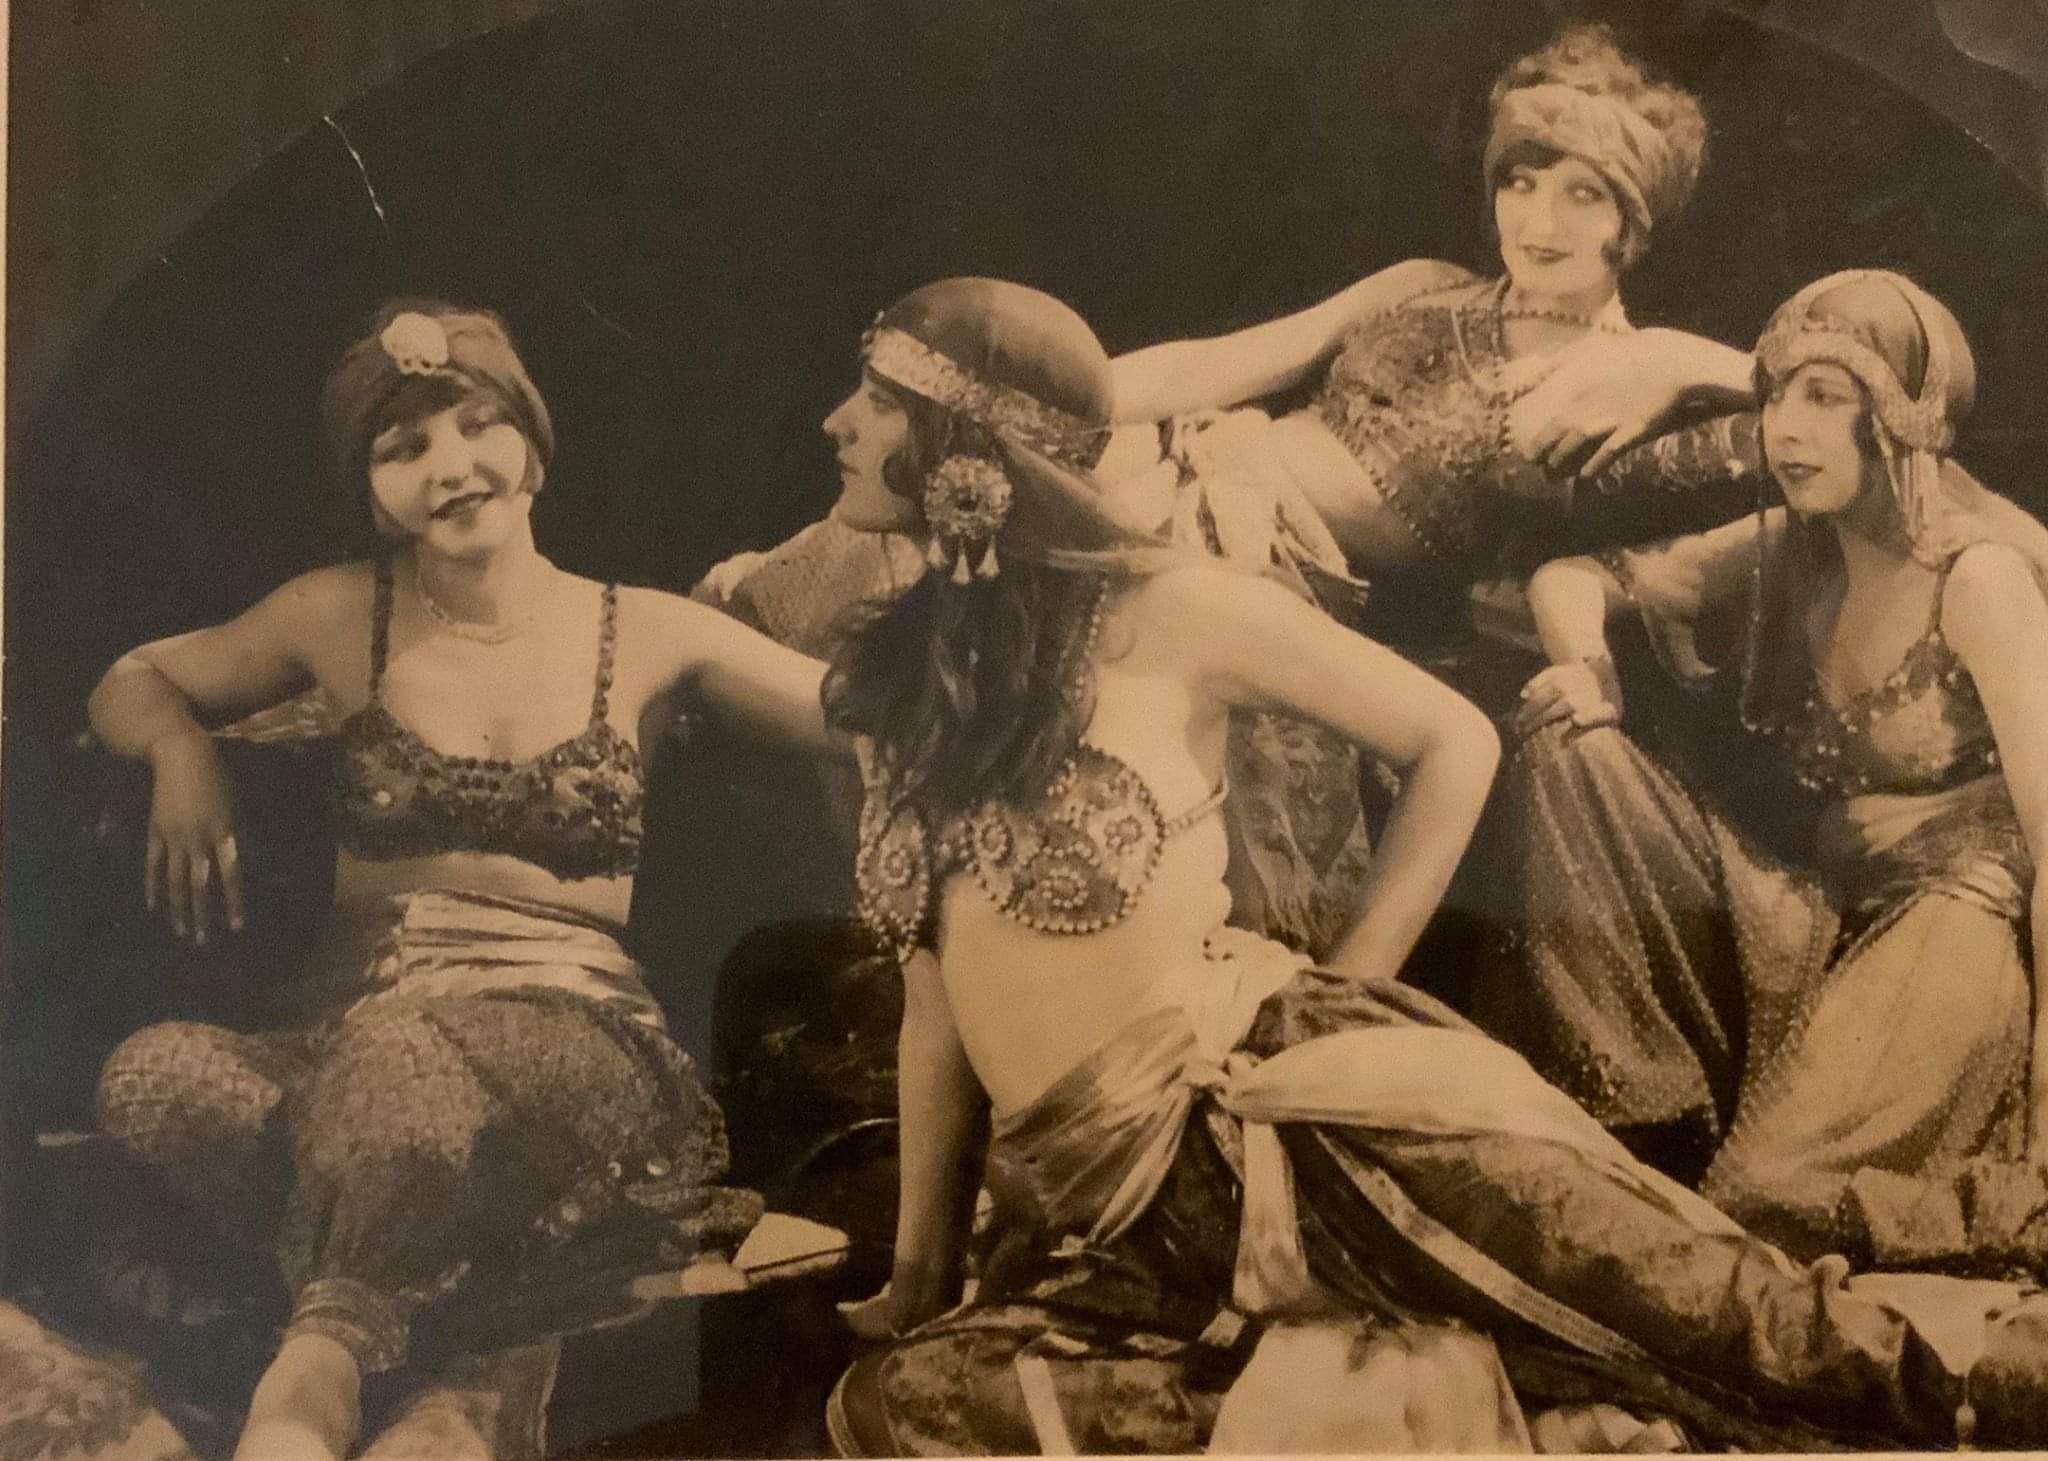 My Great Grandma (second from right) and her sister (far left) as actresses in a silent movie in the 1920s.jpg